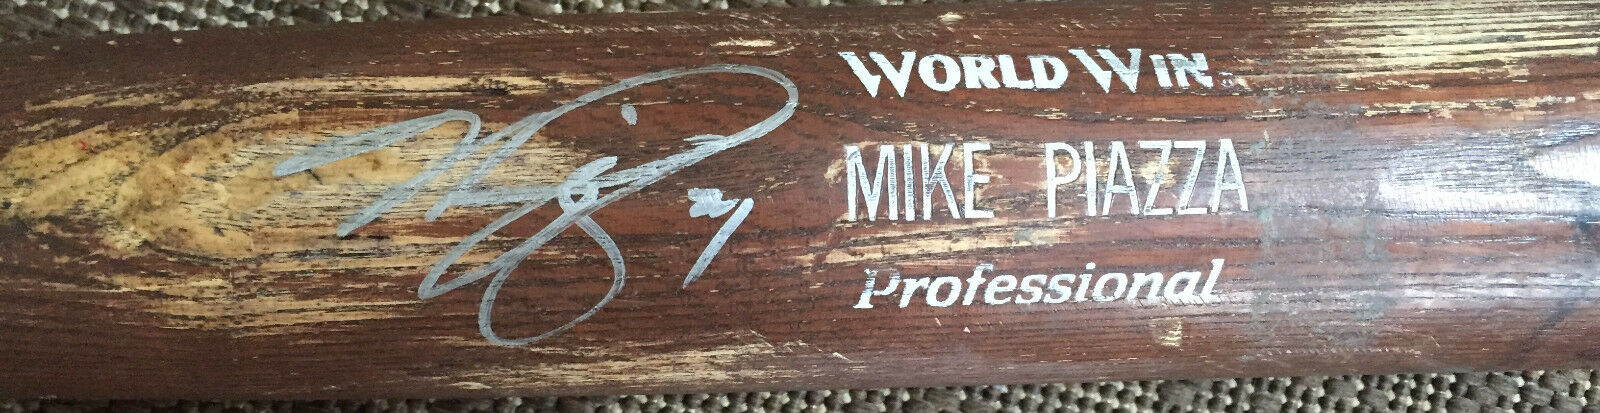 Mike Piazza Signed Game Used Mizuno Baseball Bat Uncracked NY Mets